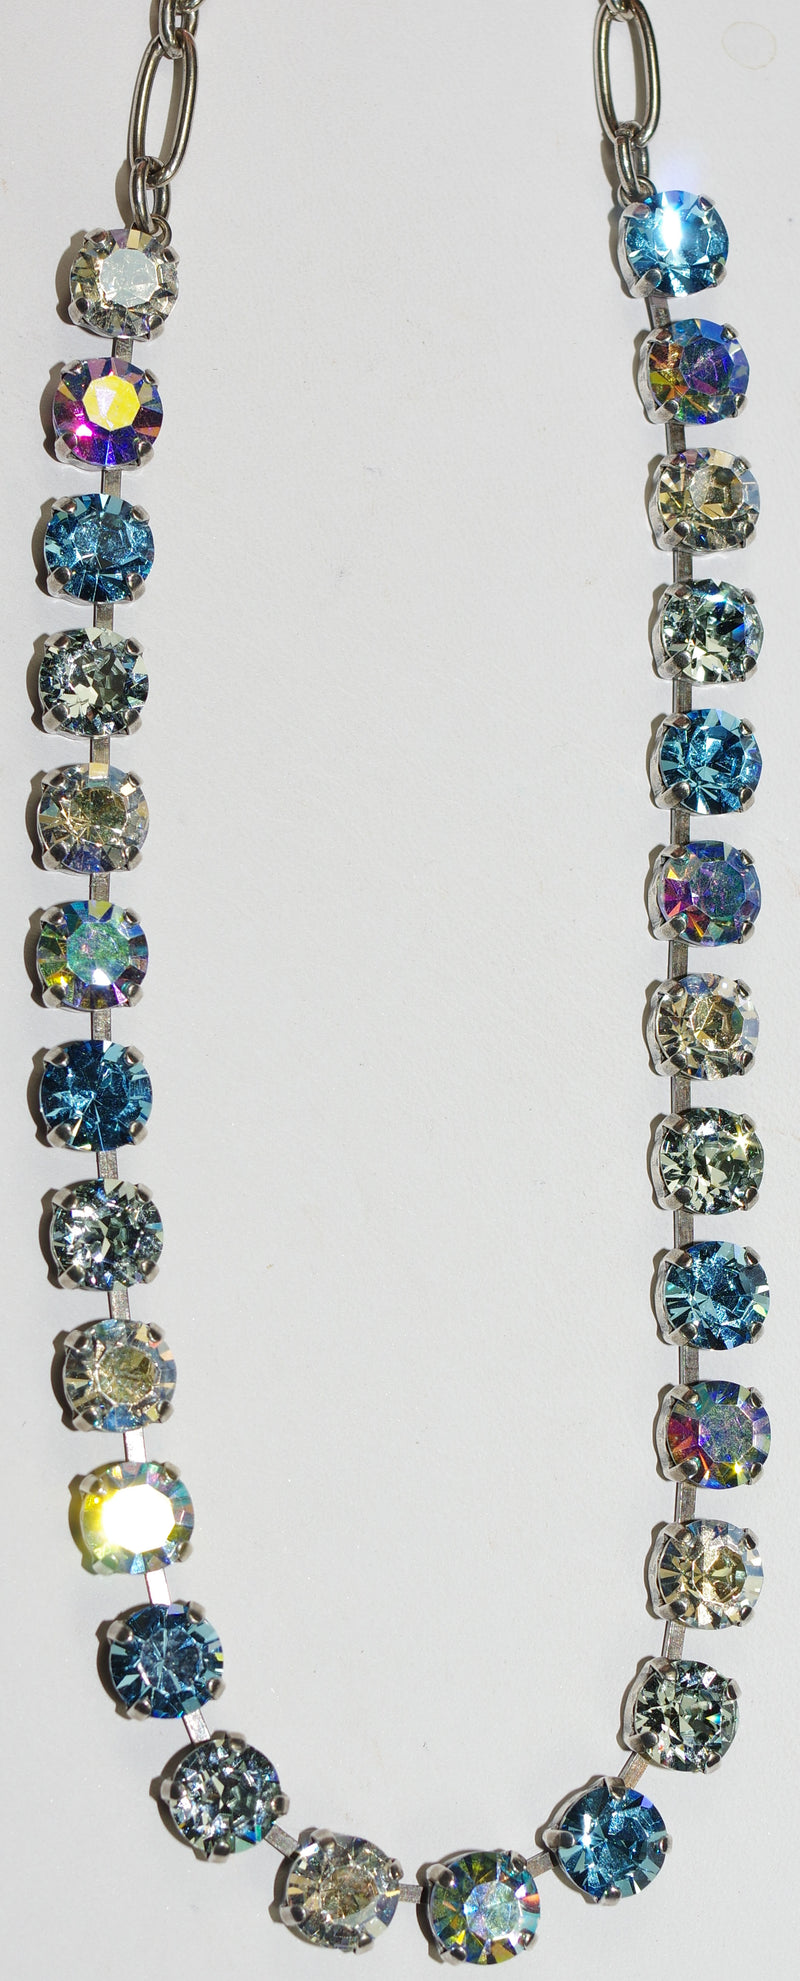 MARIANA NECKLACE BETTE ITALIAN ICE: blue, clear 1/4" stones in silver rhodium setting, 17" adjustable chain